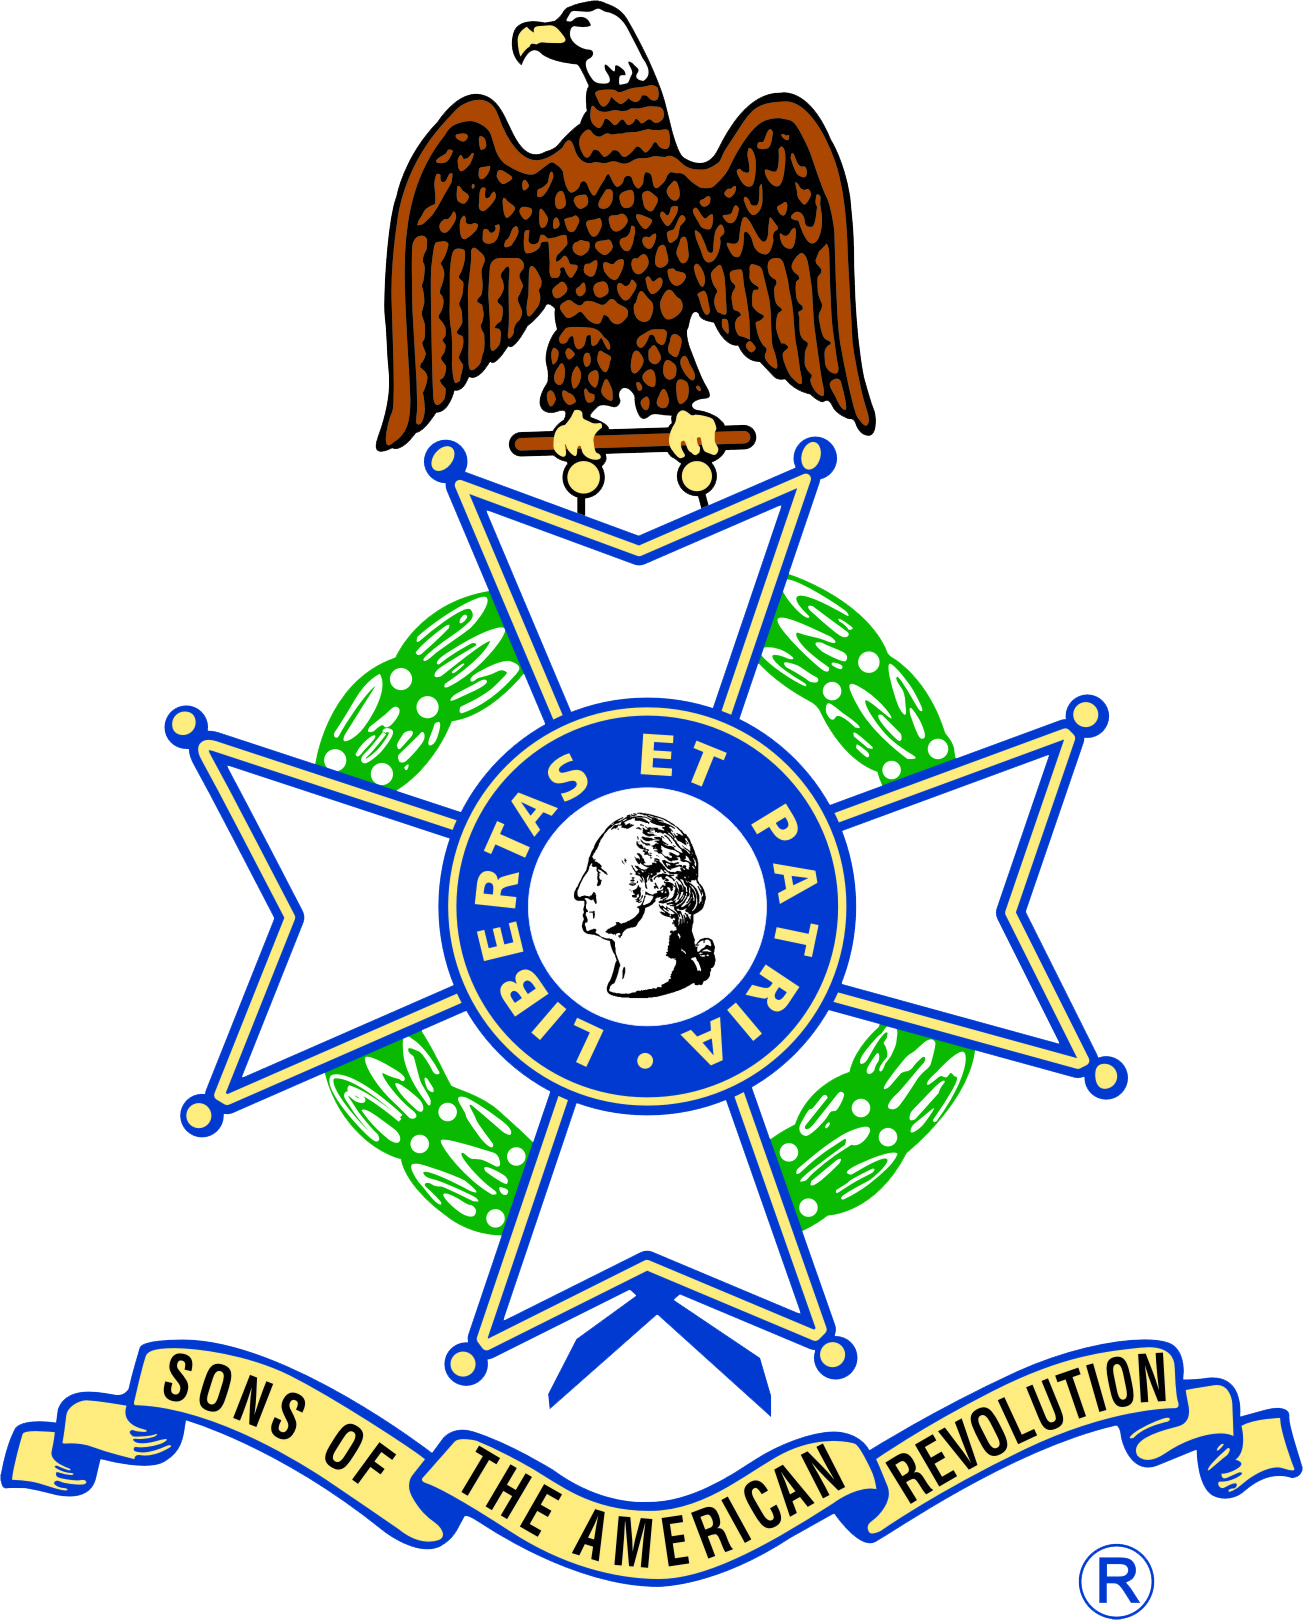 A Blue And Yellow Emblem With A Bird And A White Circle With A Man's Head